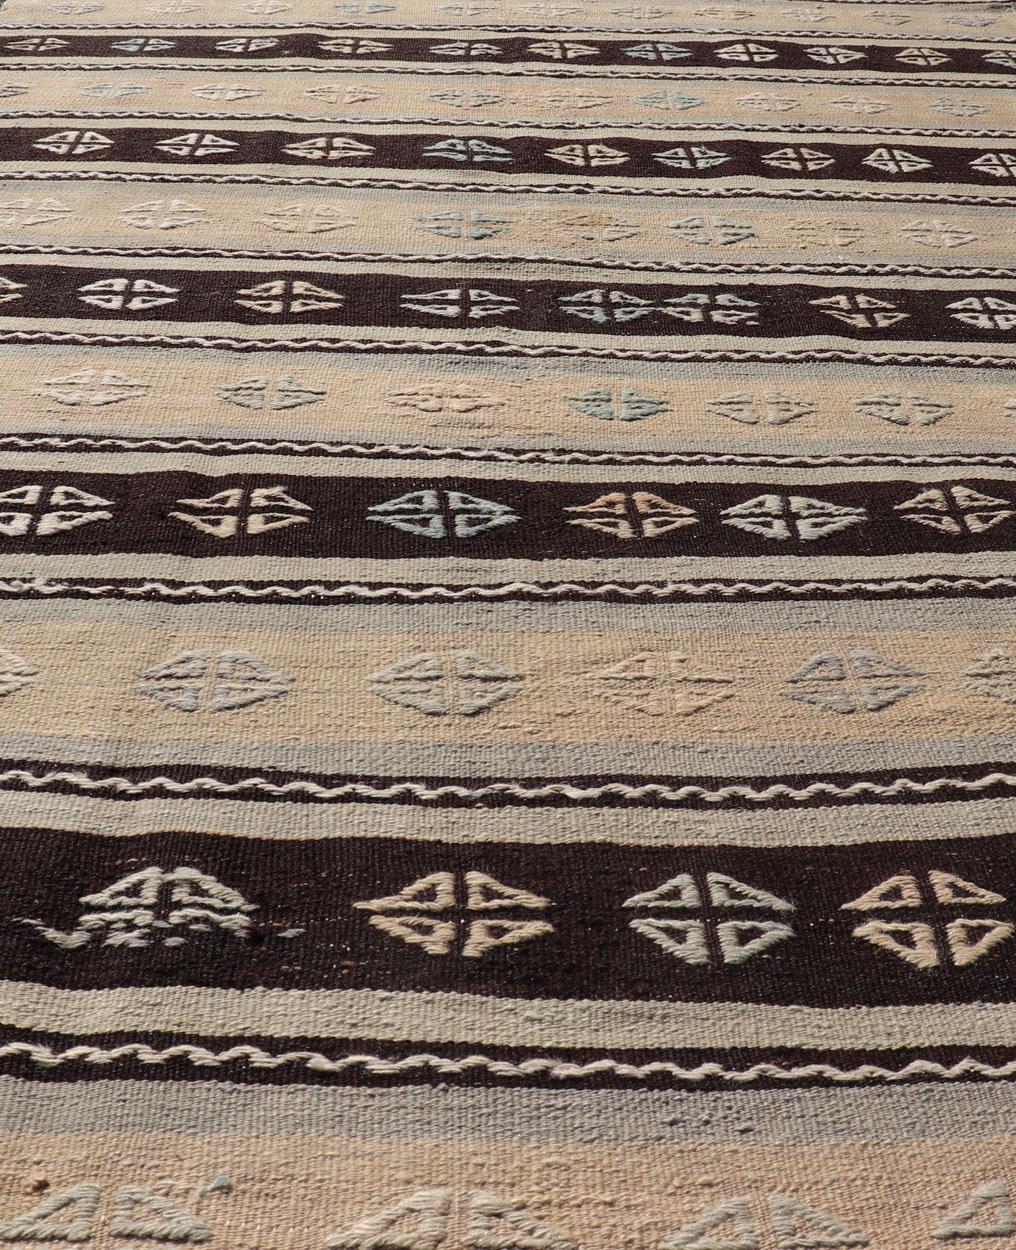 Vintage Hand Woven Turkish Tribal Kilim with Stripes and Tribal Motifs 1